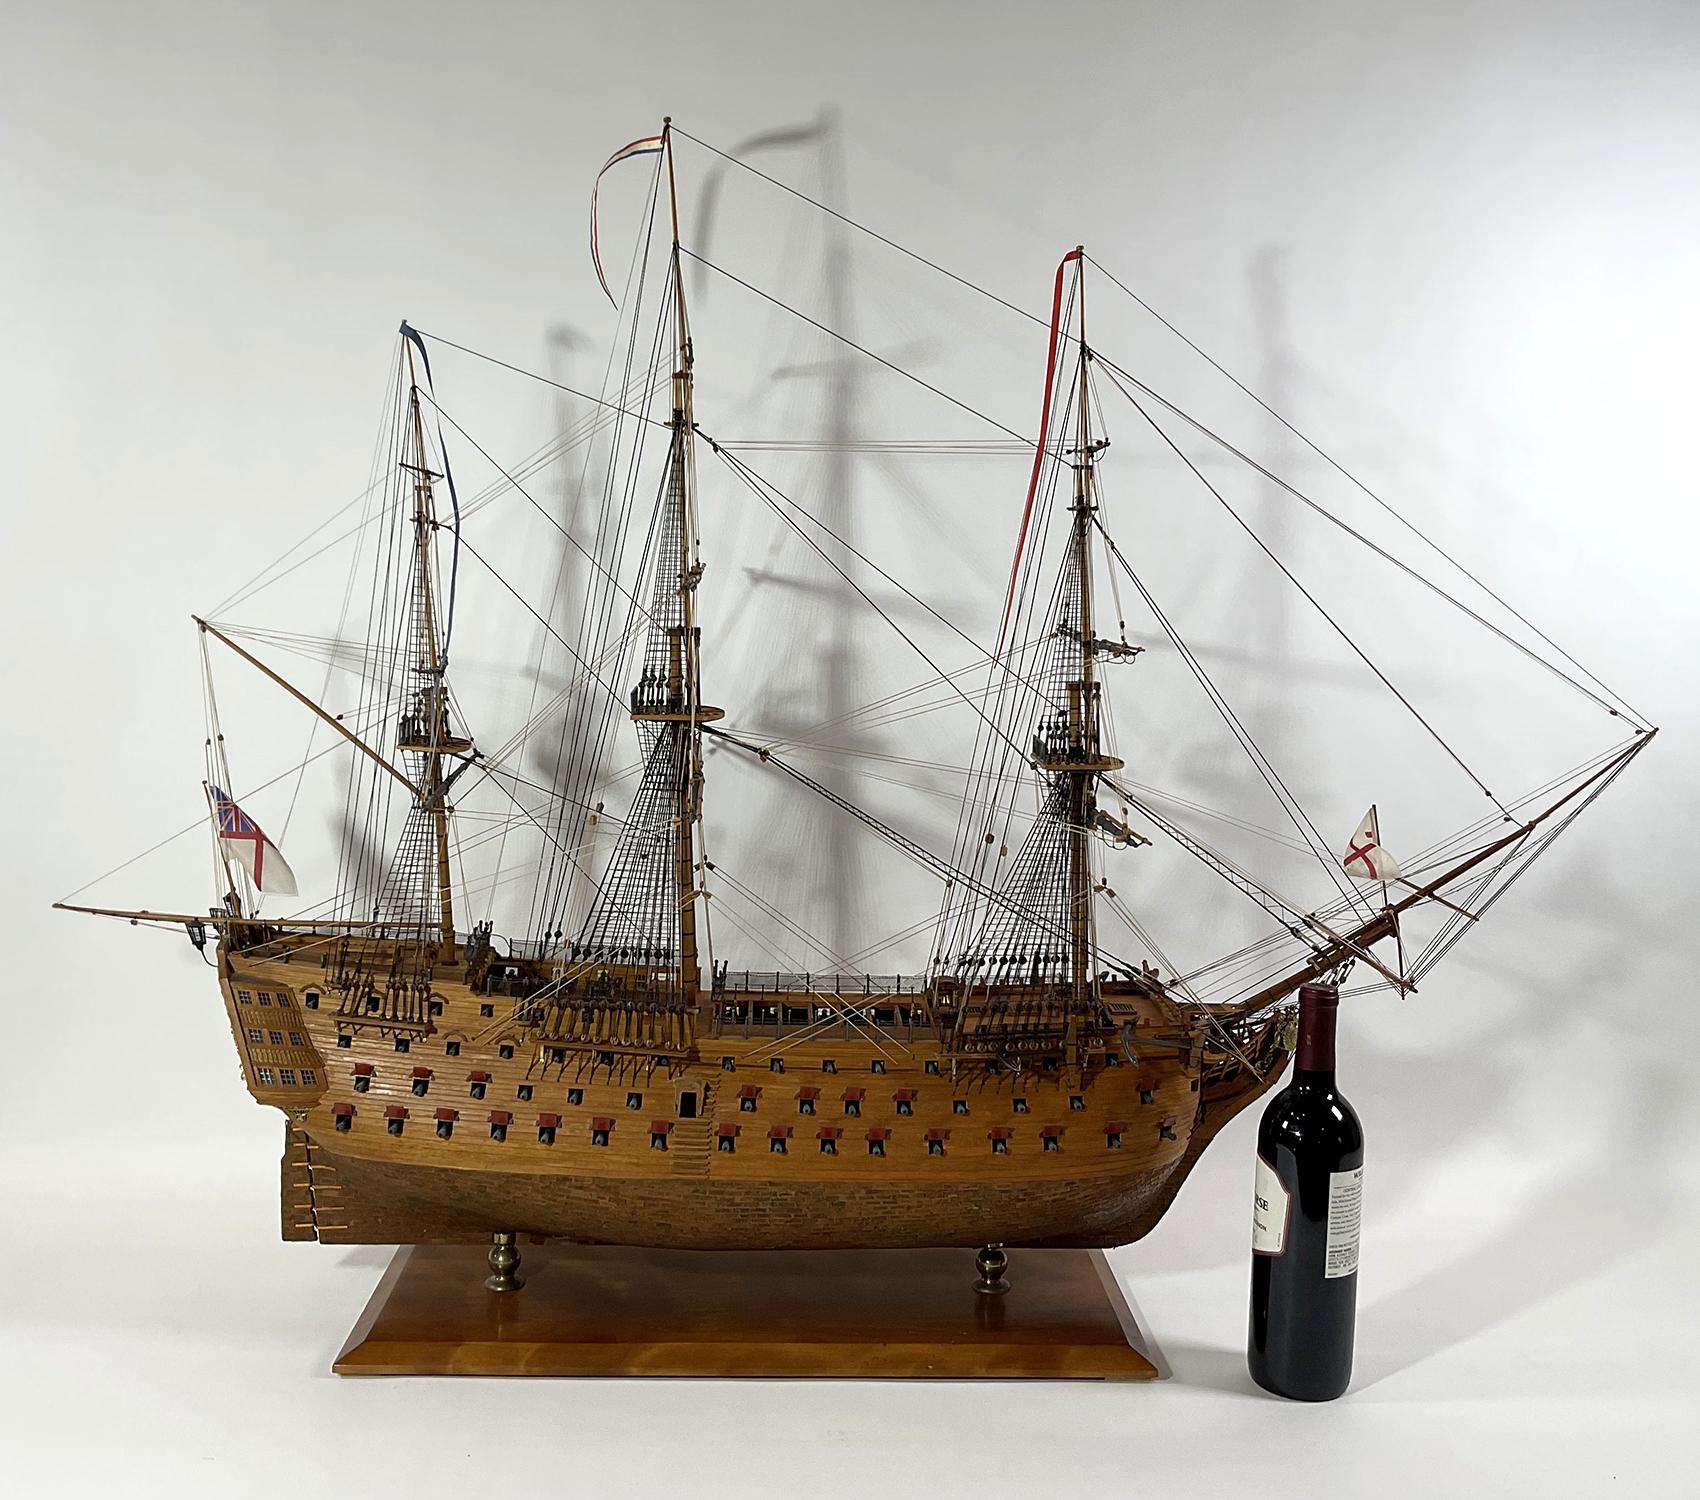 North American Model of the British Royal Navy Frigate HMS Victory For Sale